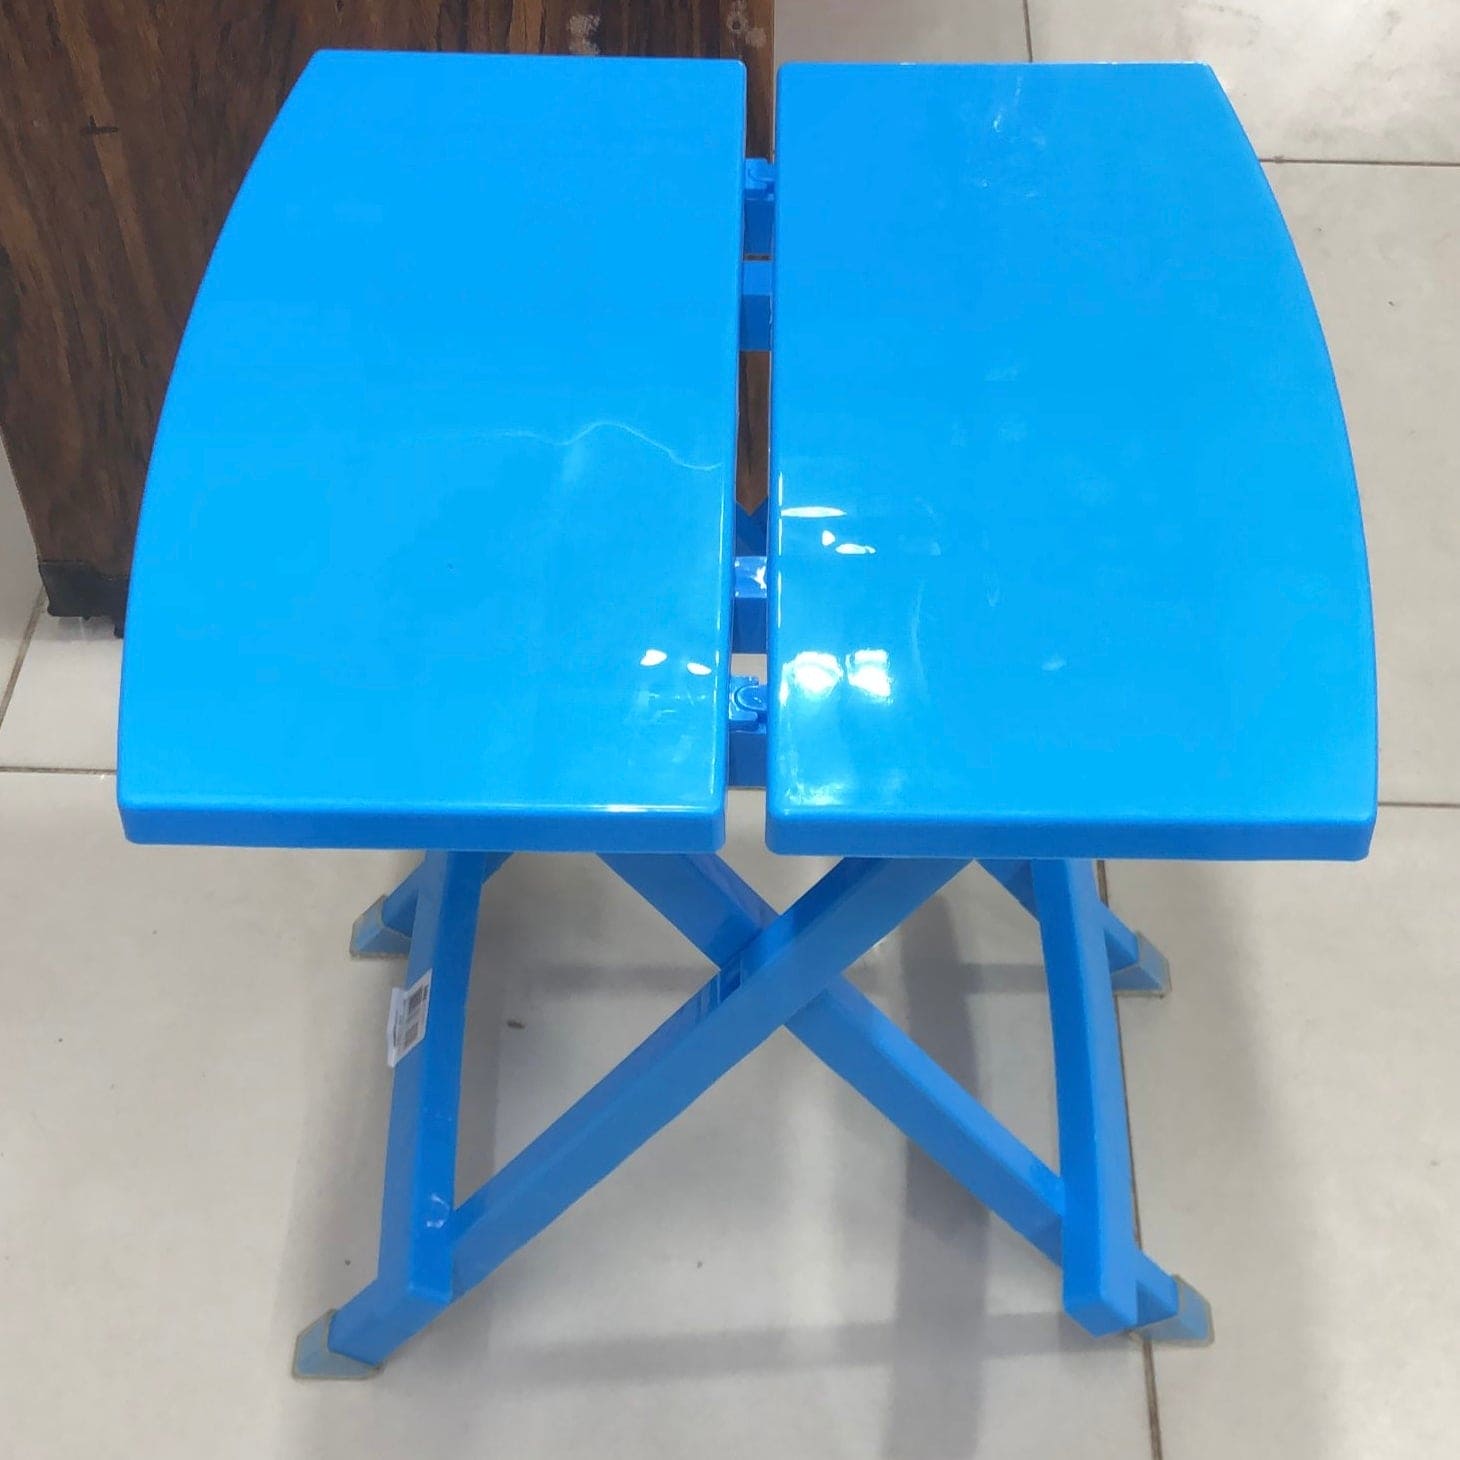 Kids Folding Table, Portable Folding Side Table, Foldable Coffee Table for Living Room, Garden, Outdoor, Corner Table/Bedside Table for Bedroom